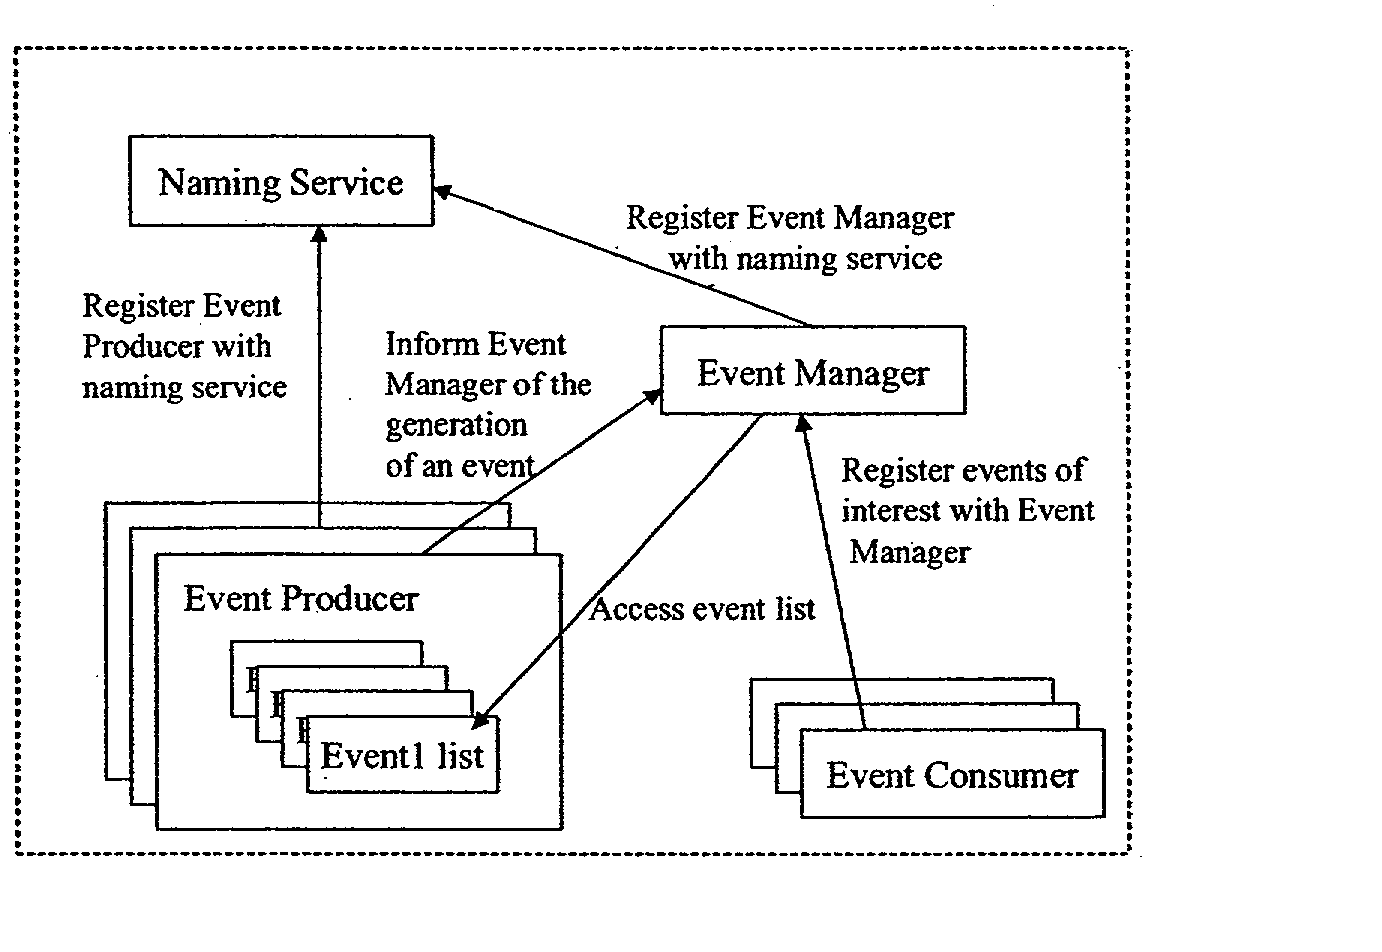 Distributed event notification service